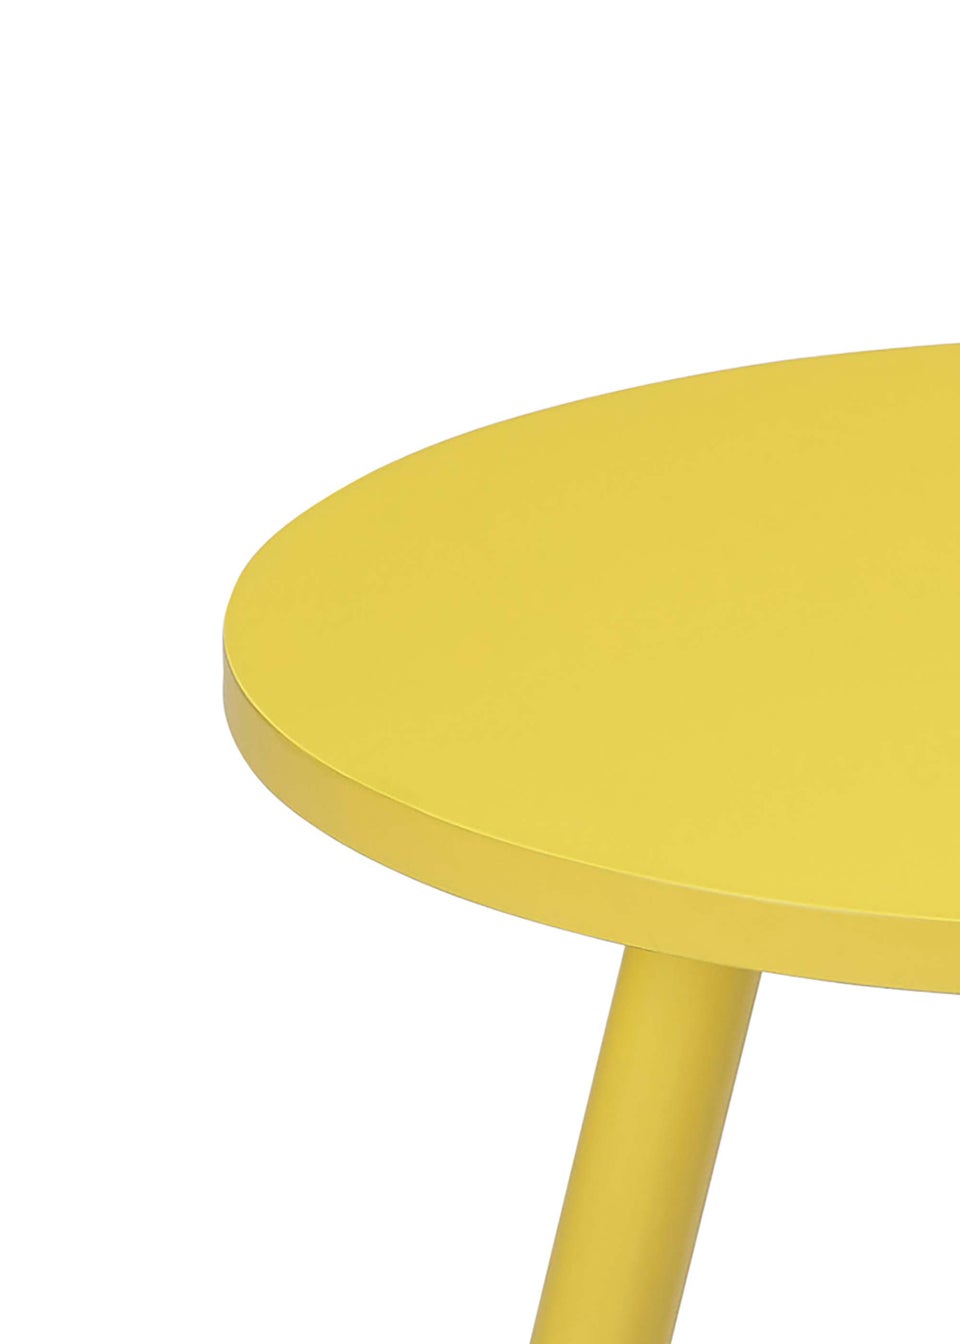 LPD Furniture Costa Side Table Yellow (450x400x400mm)